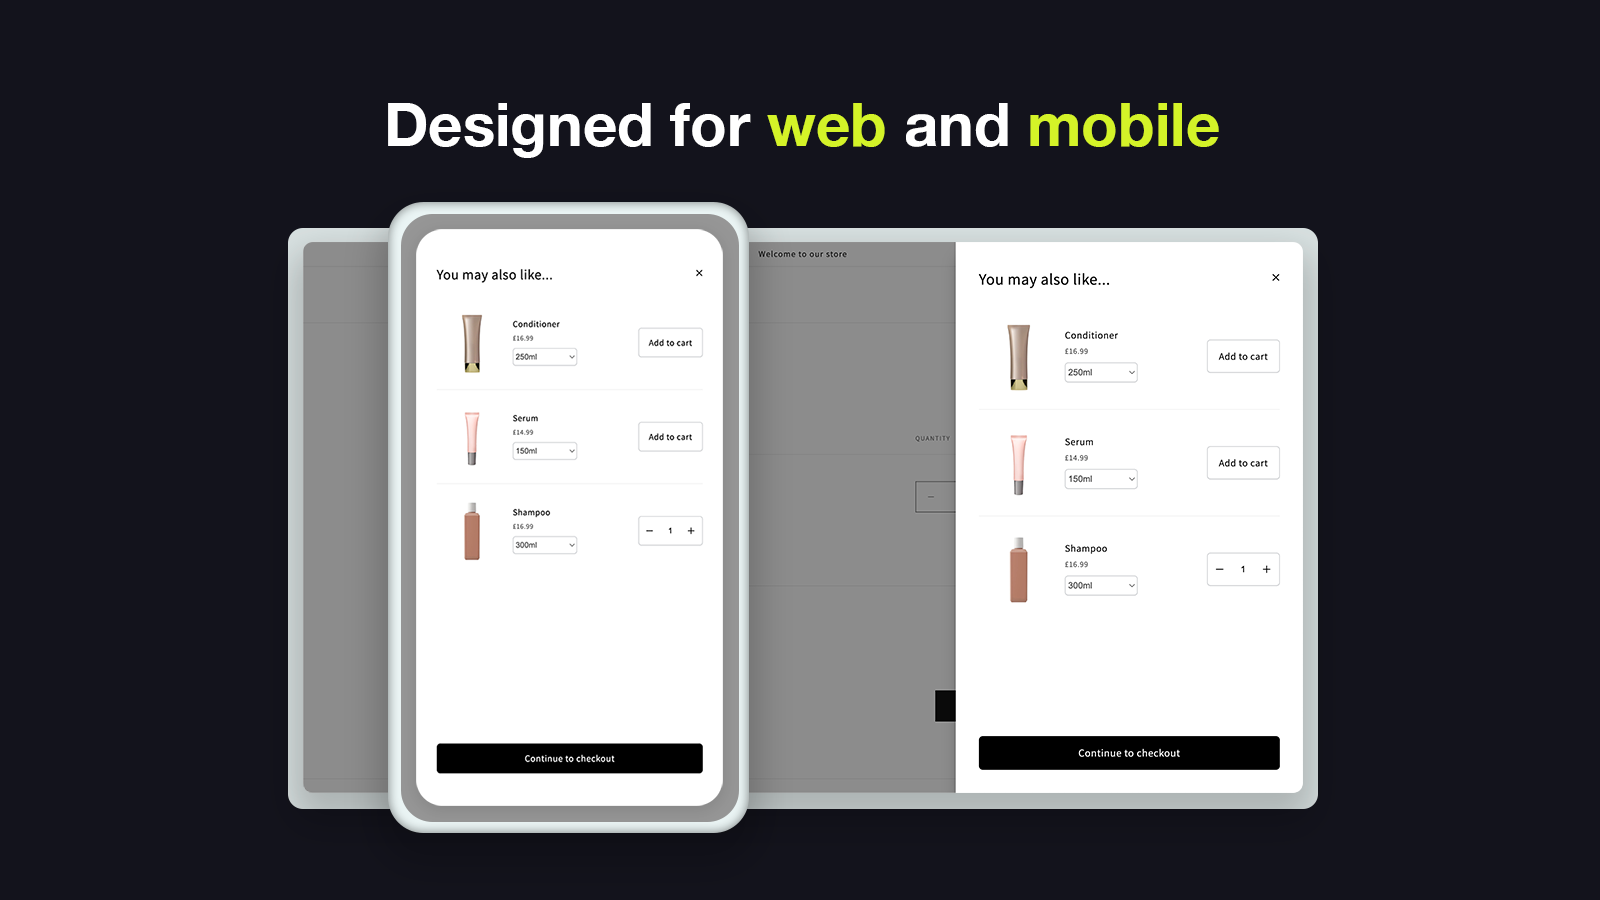 Designed for web and mobile